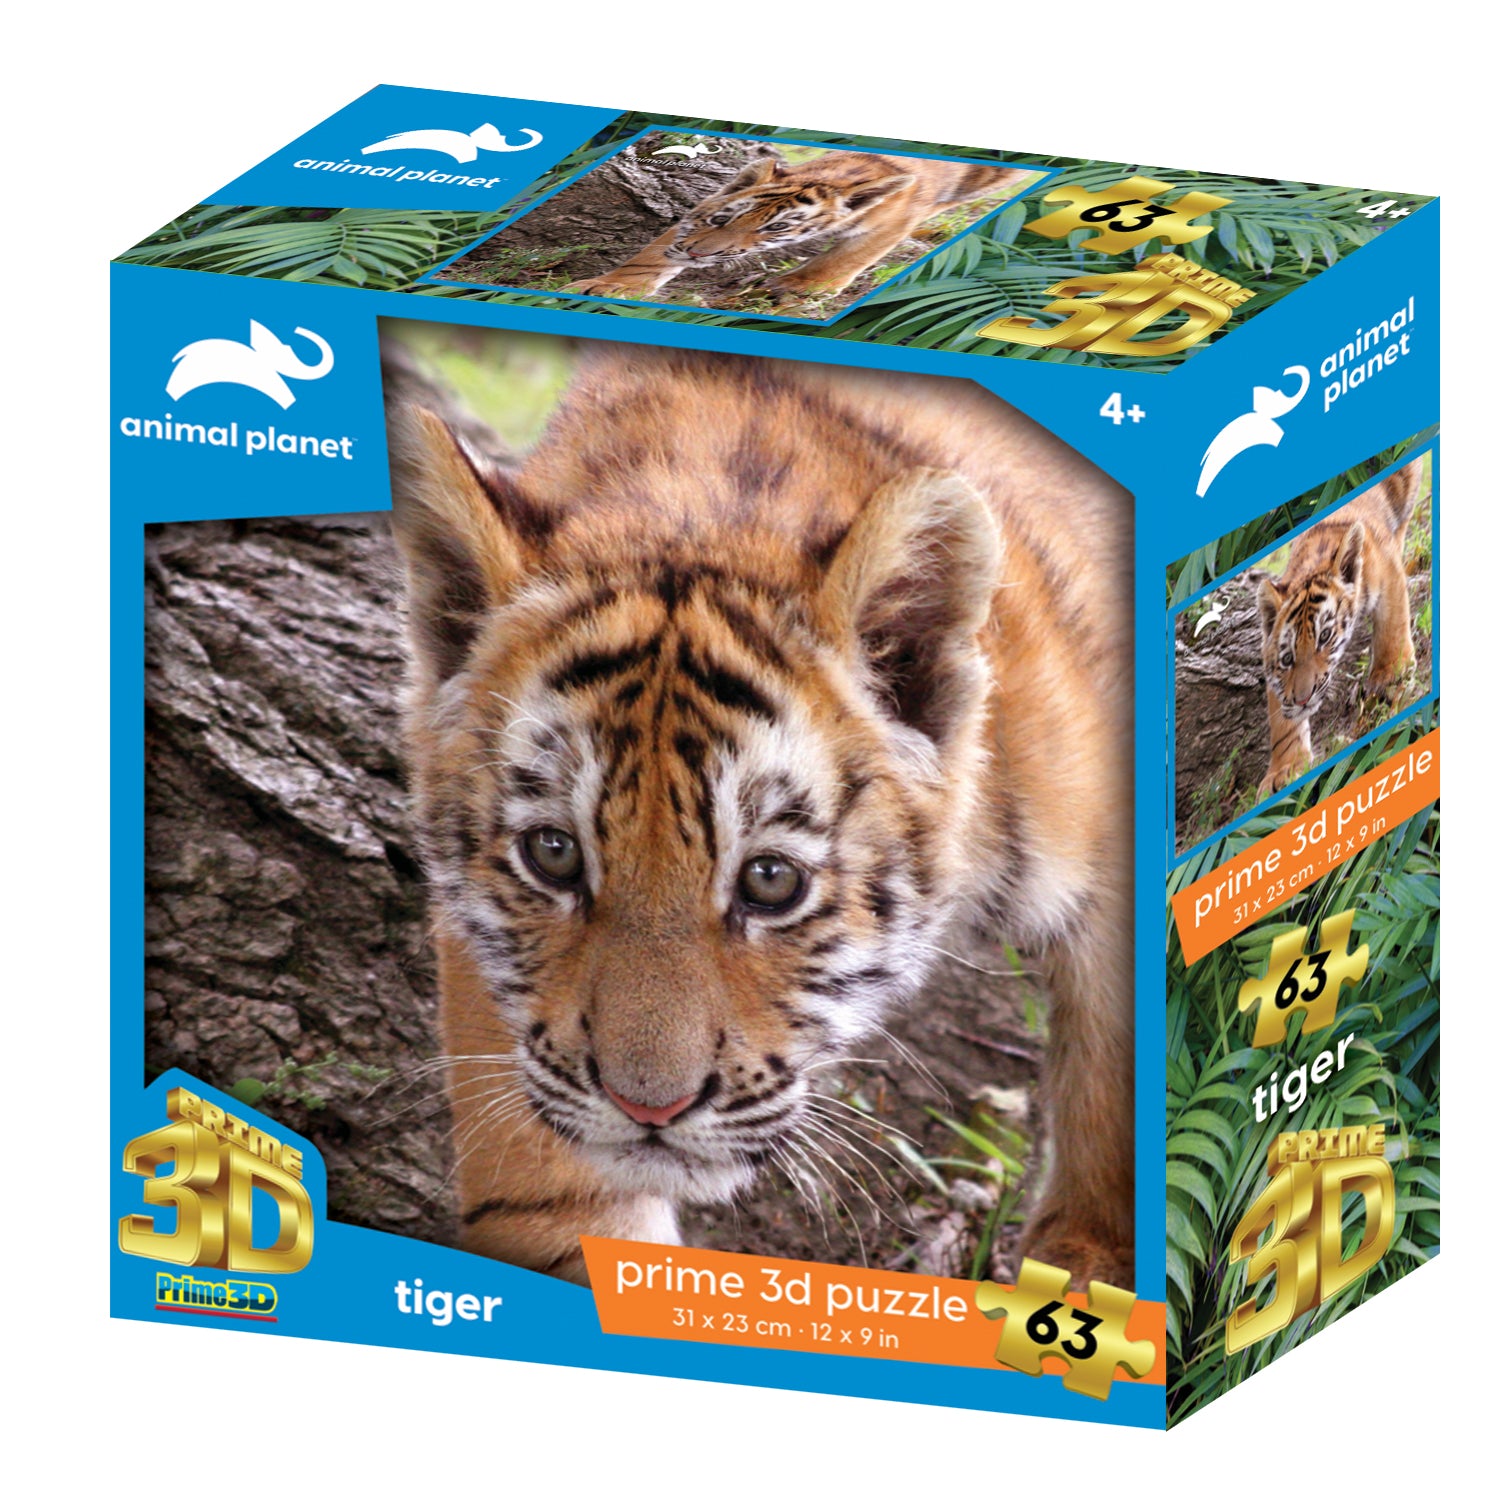 Animal Planet Tiger 63 piece 3D Jigsaw Puzzle - Chester Model Centre